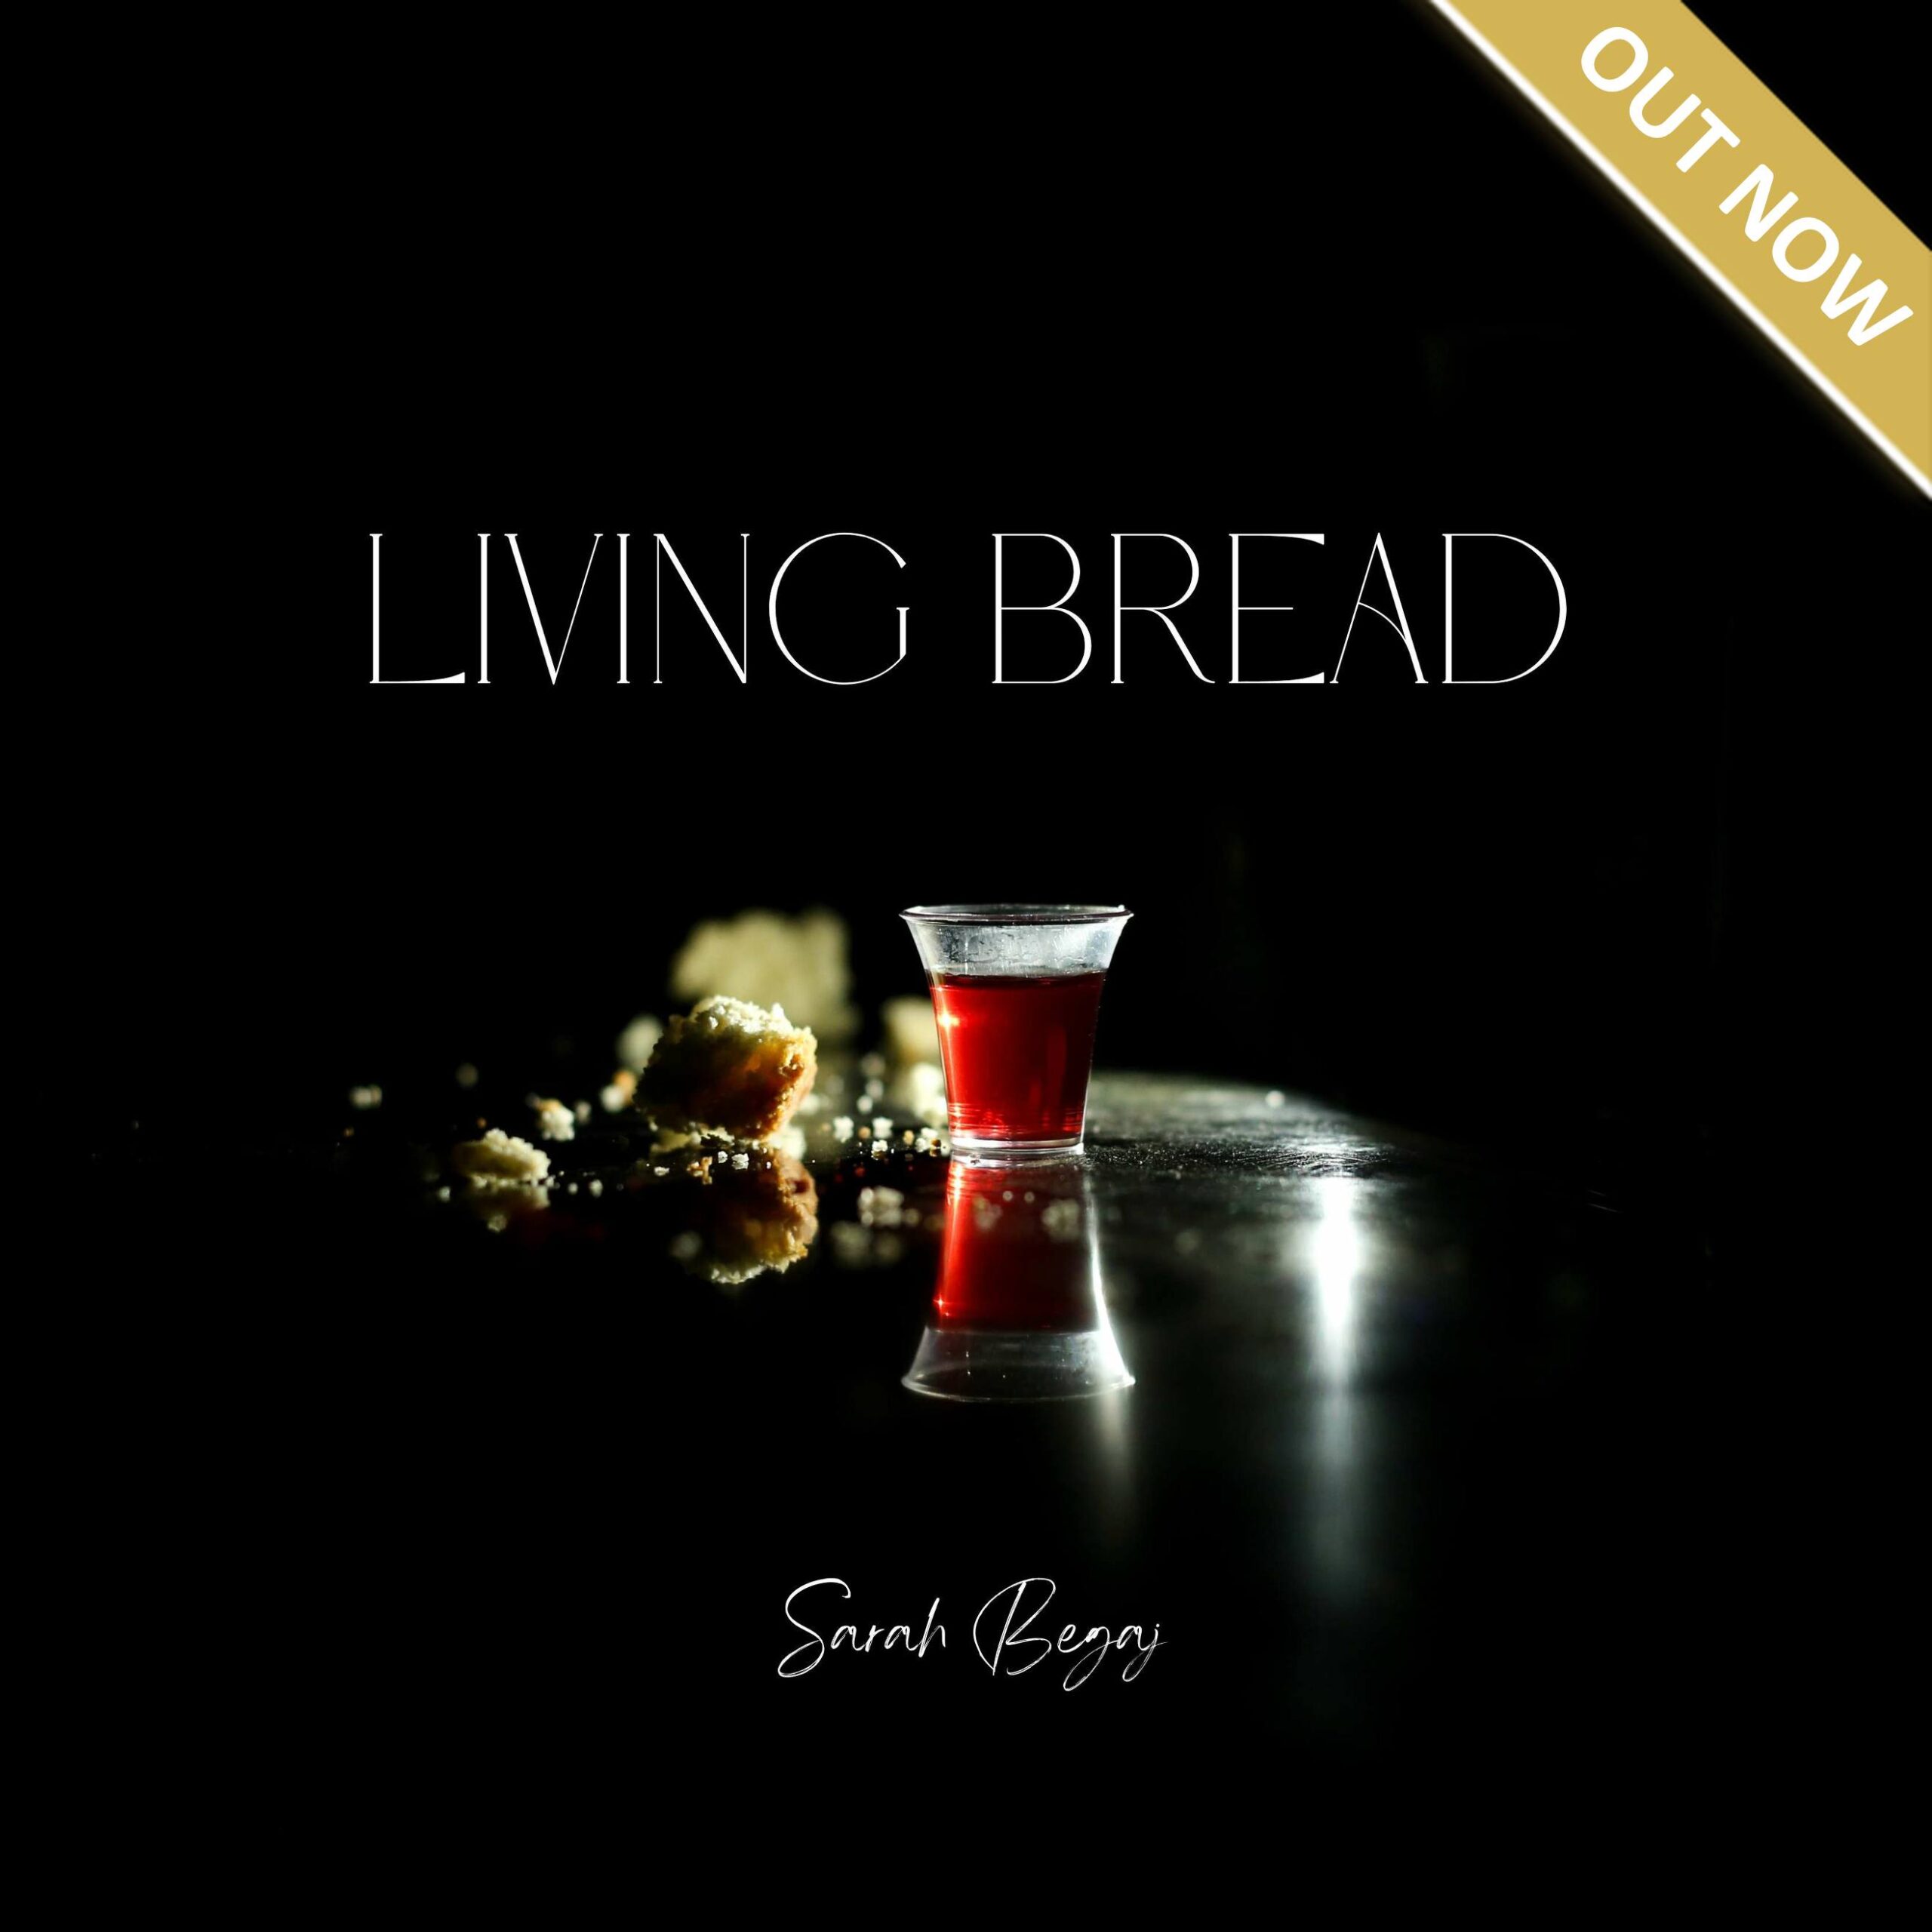 Living bread out now